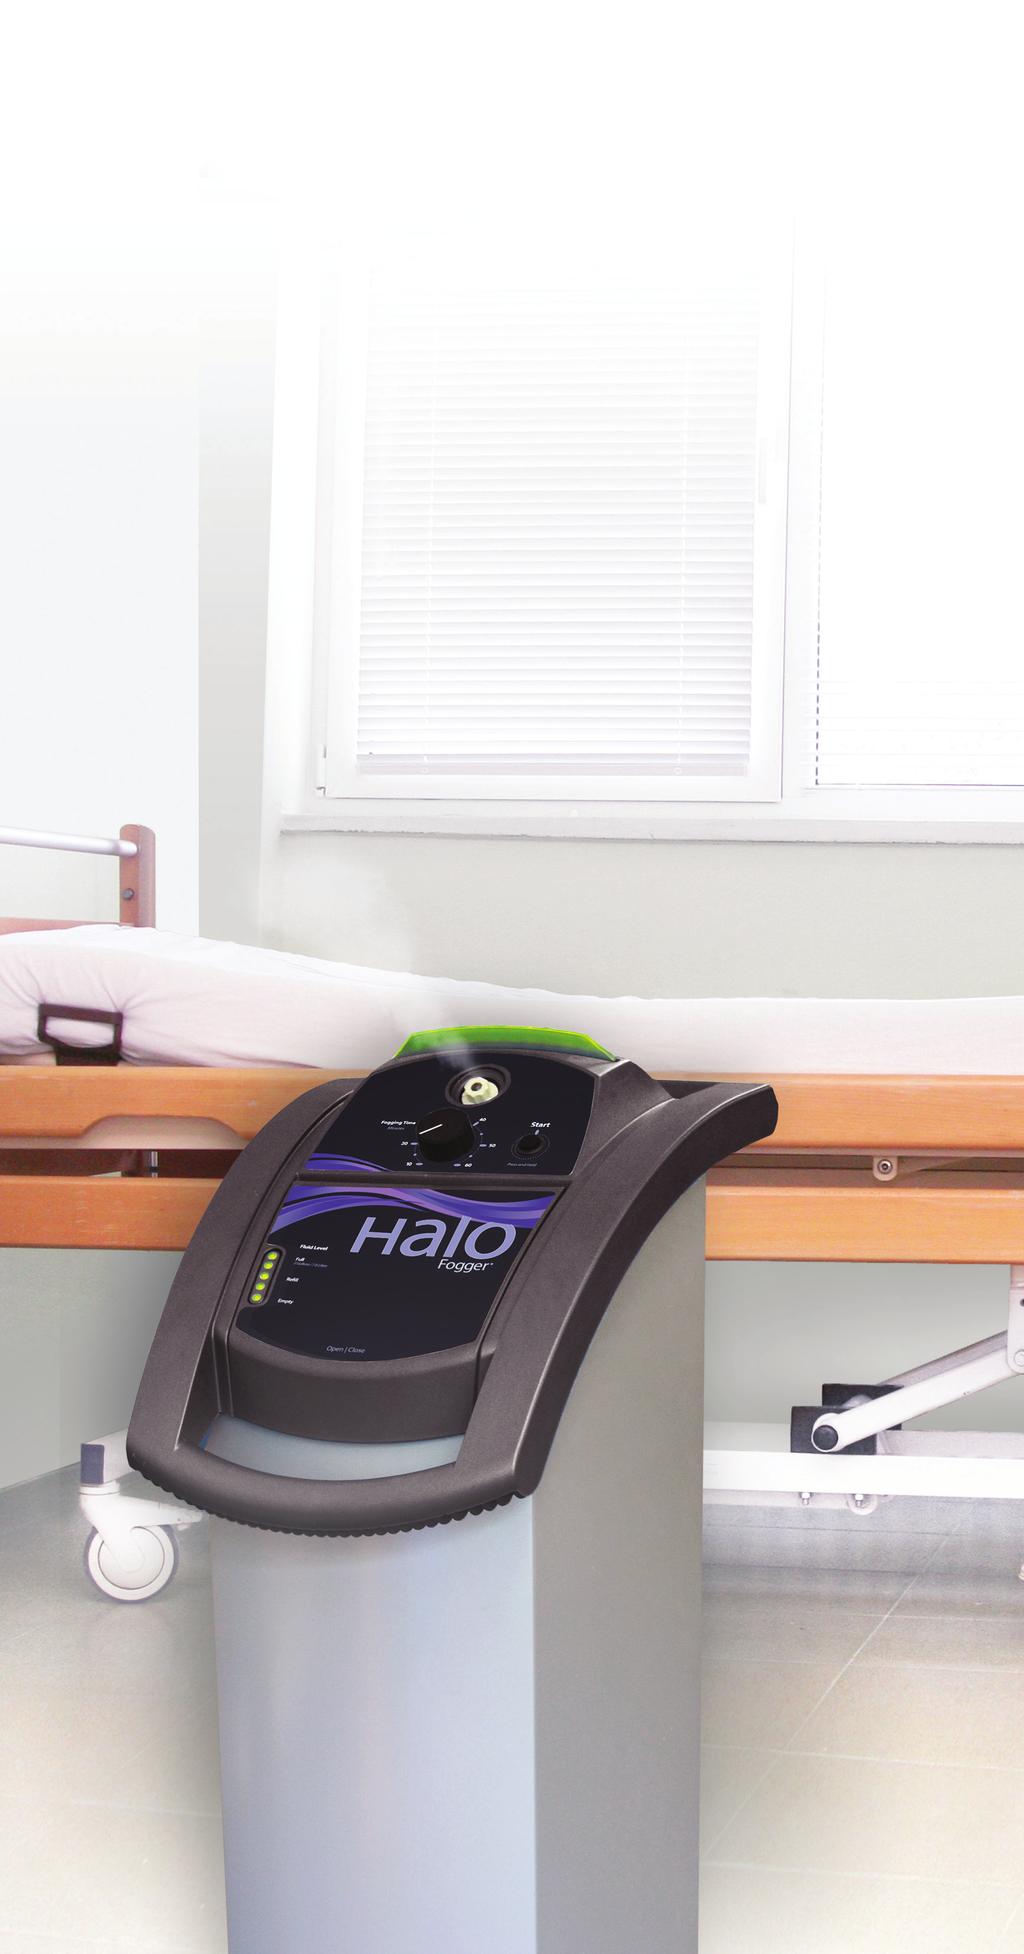 HaloFogger will contract an HAI their hospital stay. Whole Room Disinfection, Redefined.